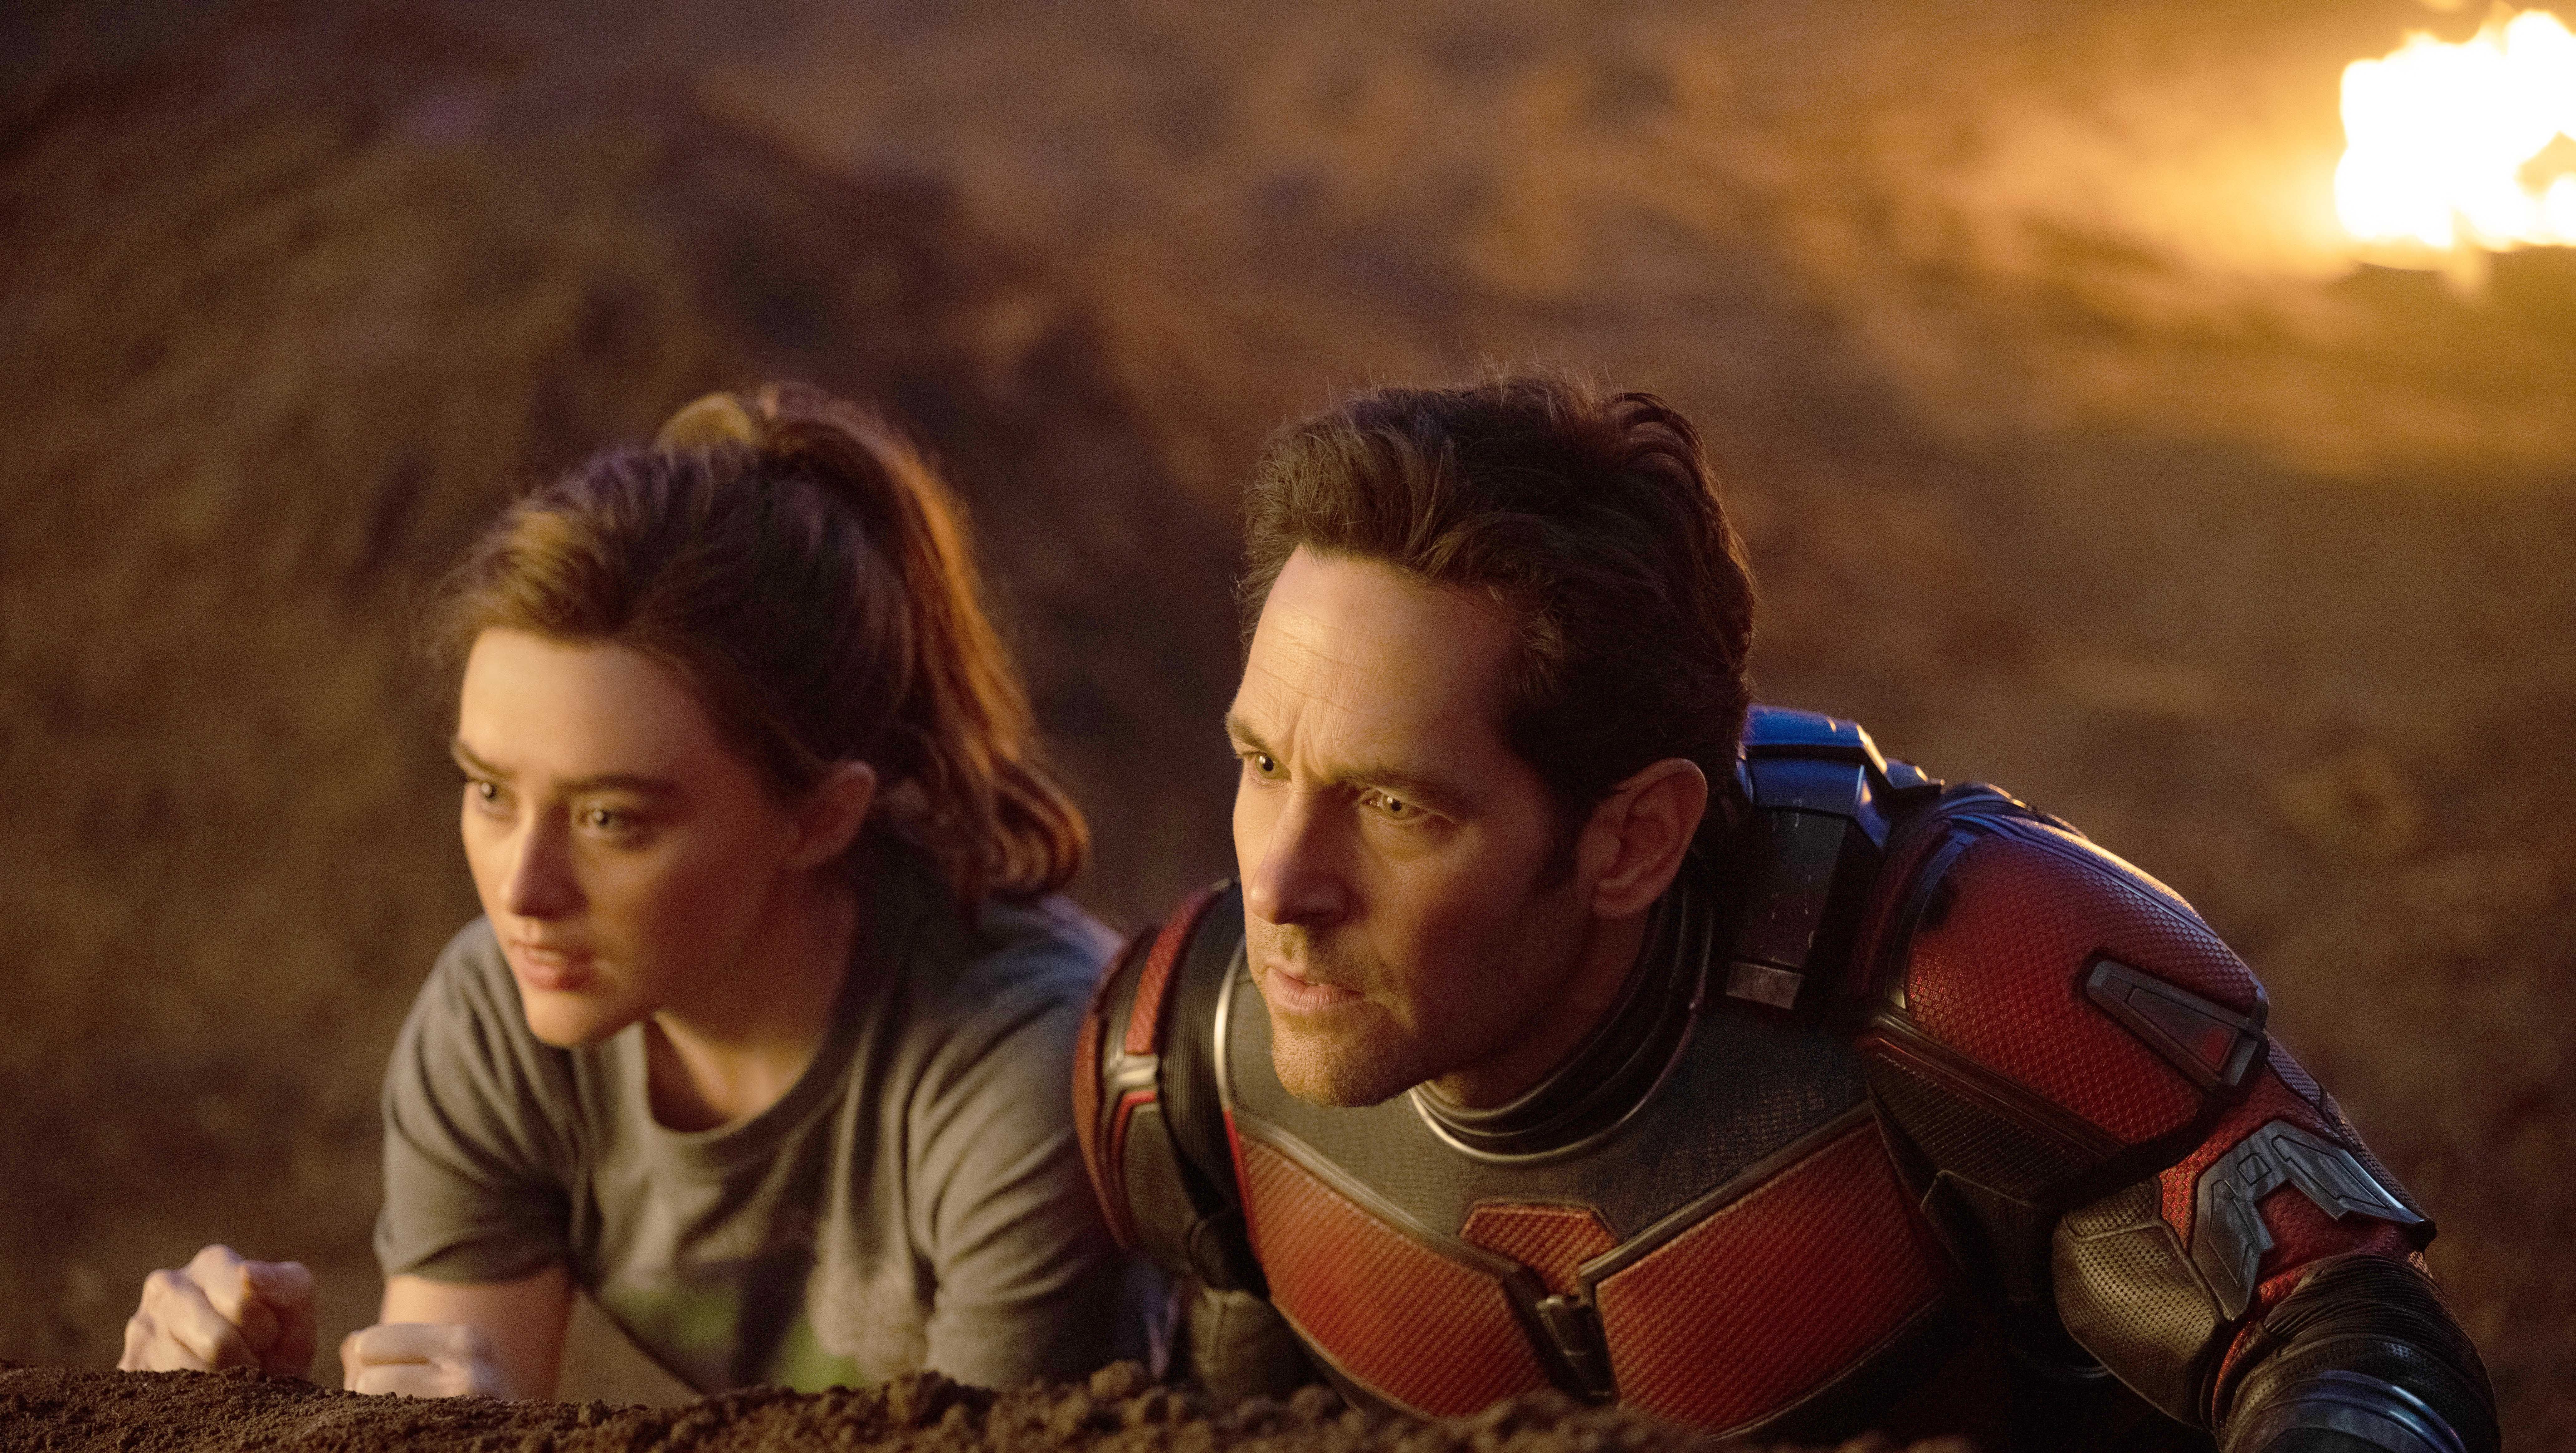 Ant-Man 3 box office will be even worse than Ant-Man